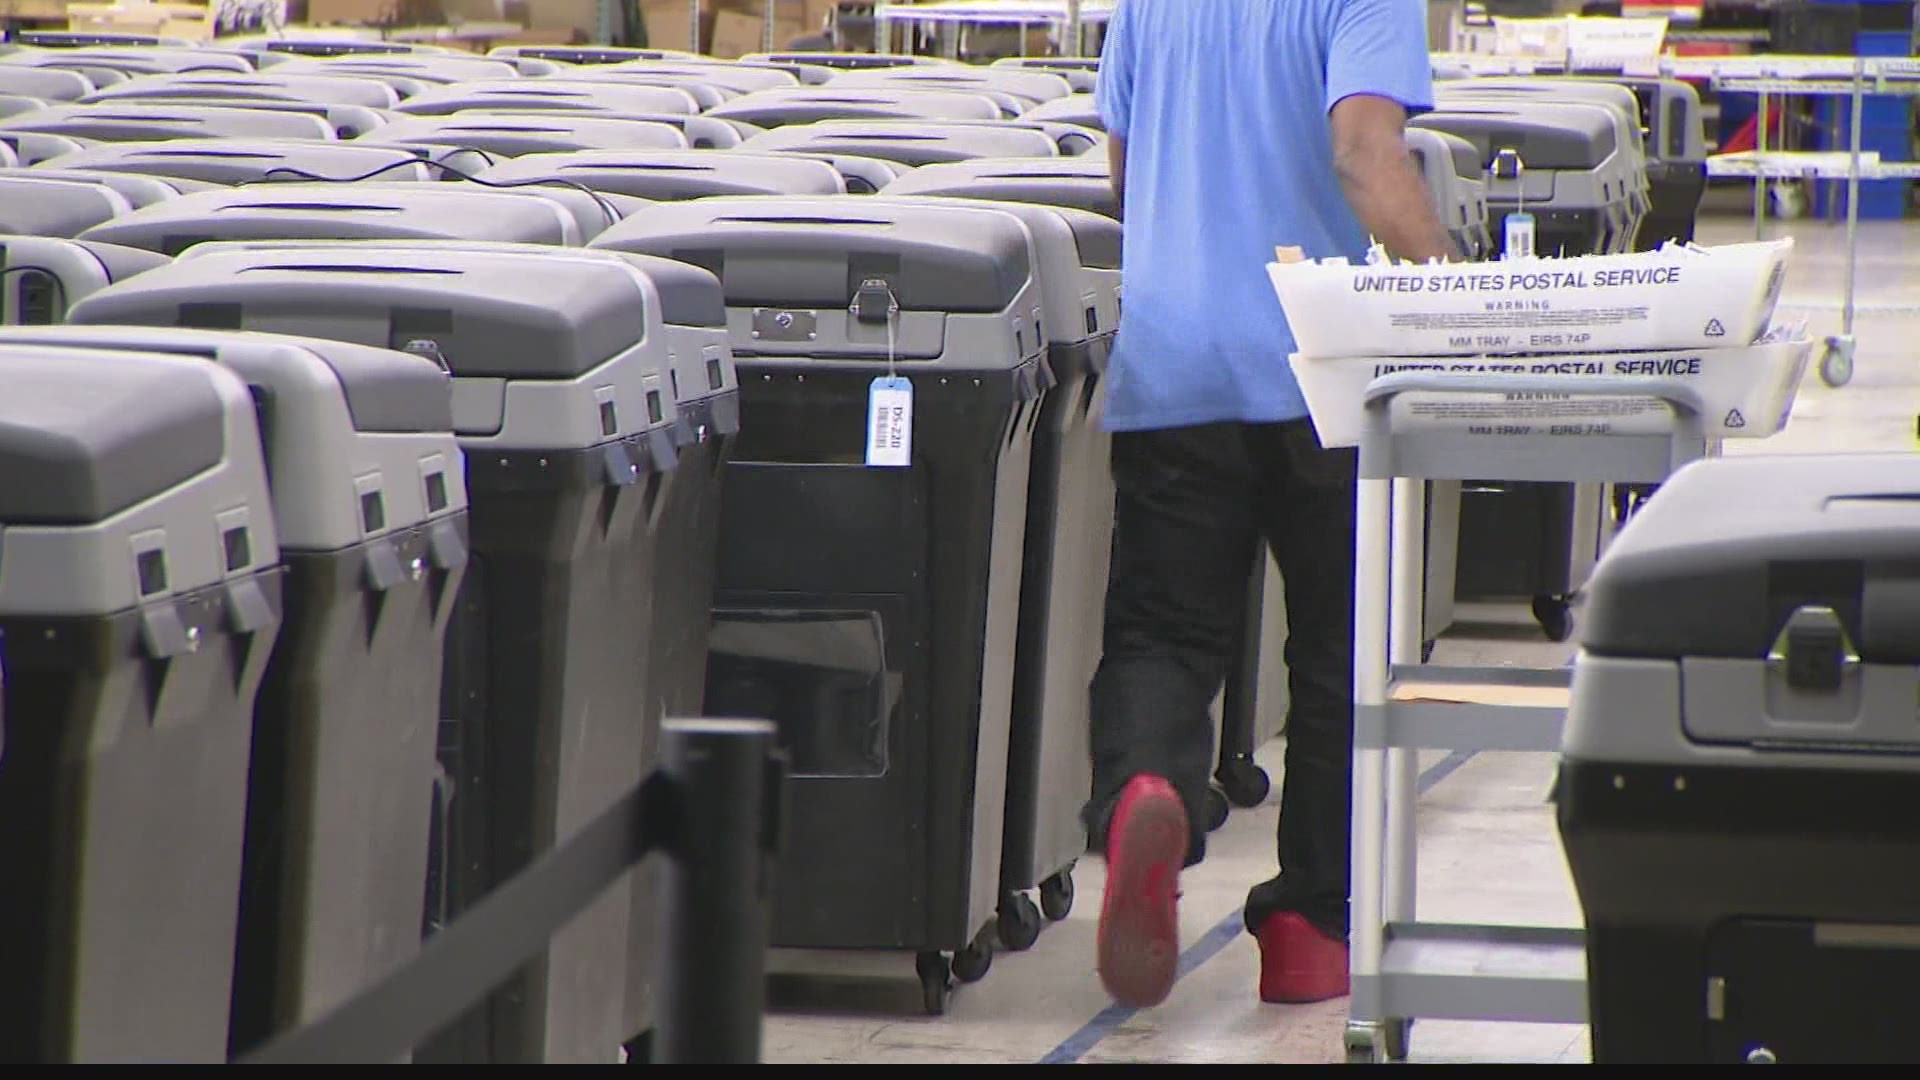 Marion County has seen a 448% increase in requests for mail-in ballots